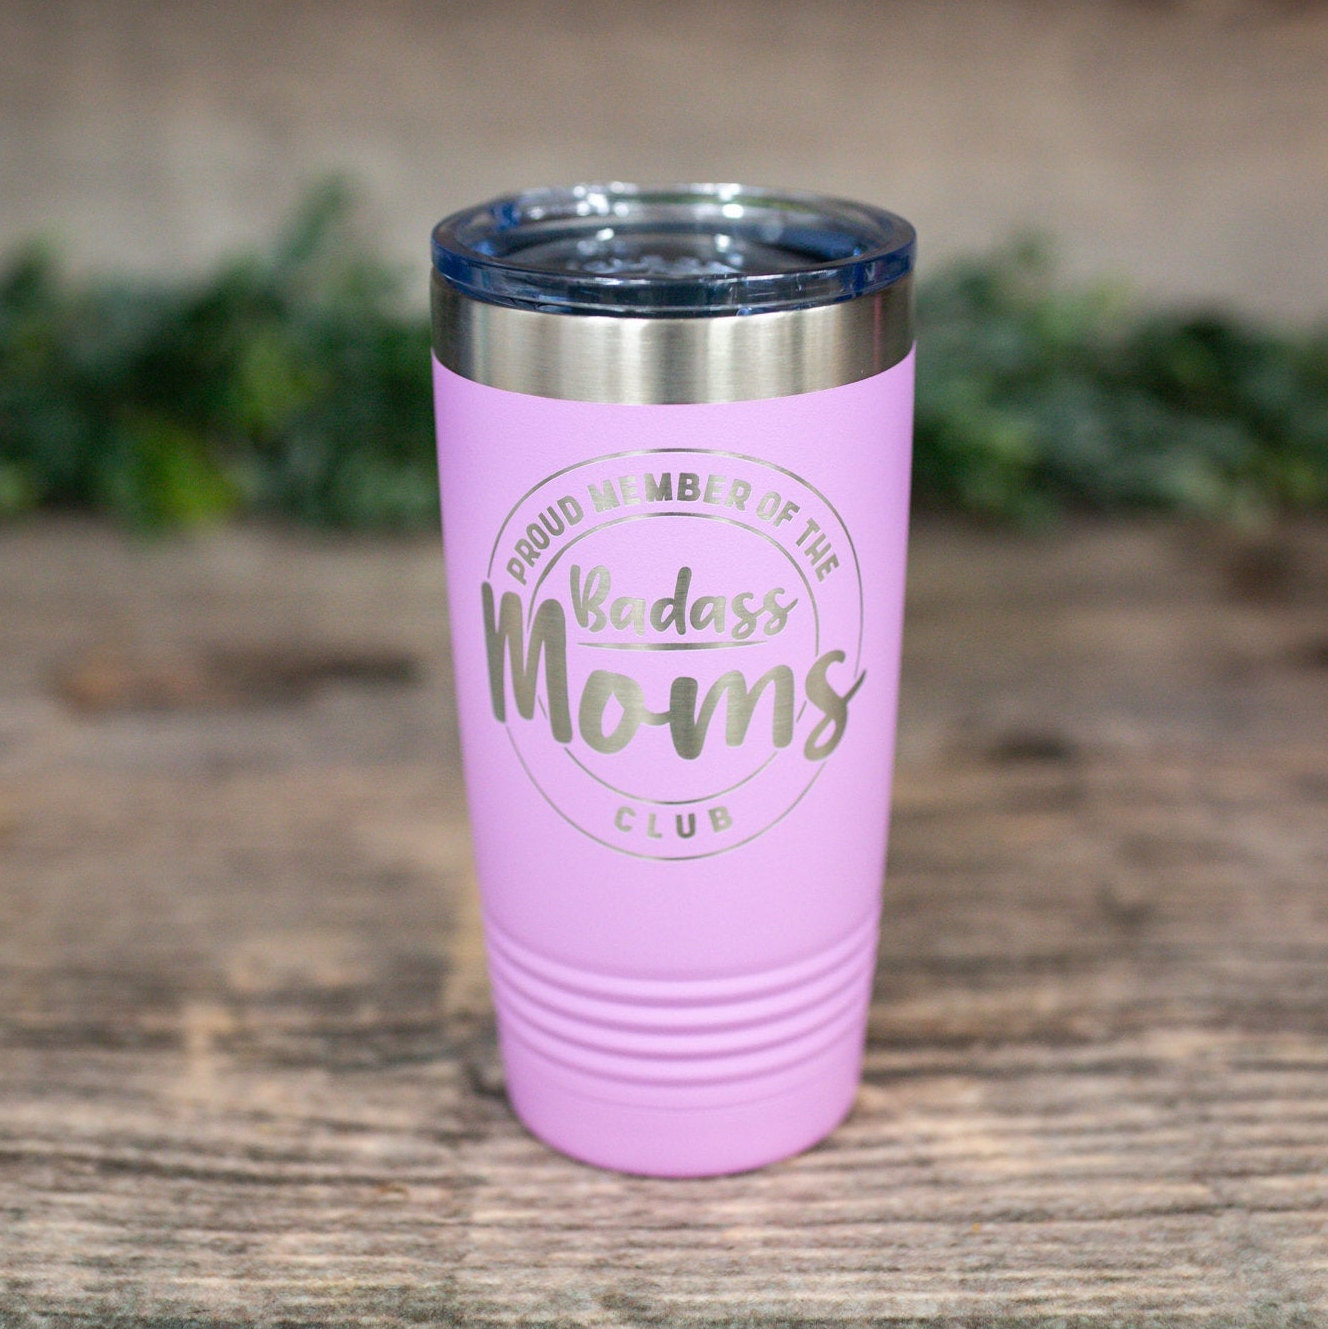 https://3cetching.com/wp-content/uploads/2021/07/proud-member-of-the-badass-moms-club-mature-engraved-stainless-tumbler-funny-mug-mothers-day-tumbler-60f79c81.jpg